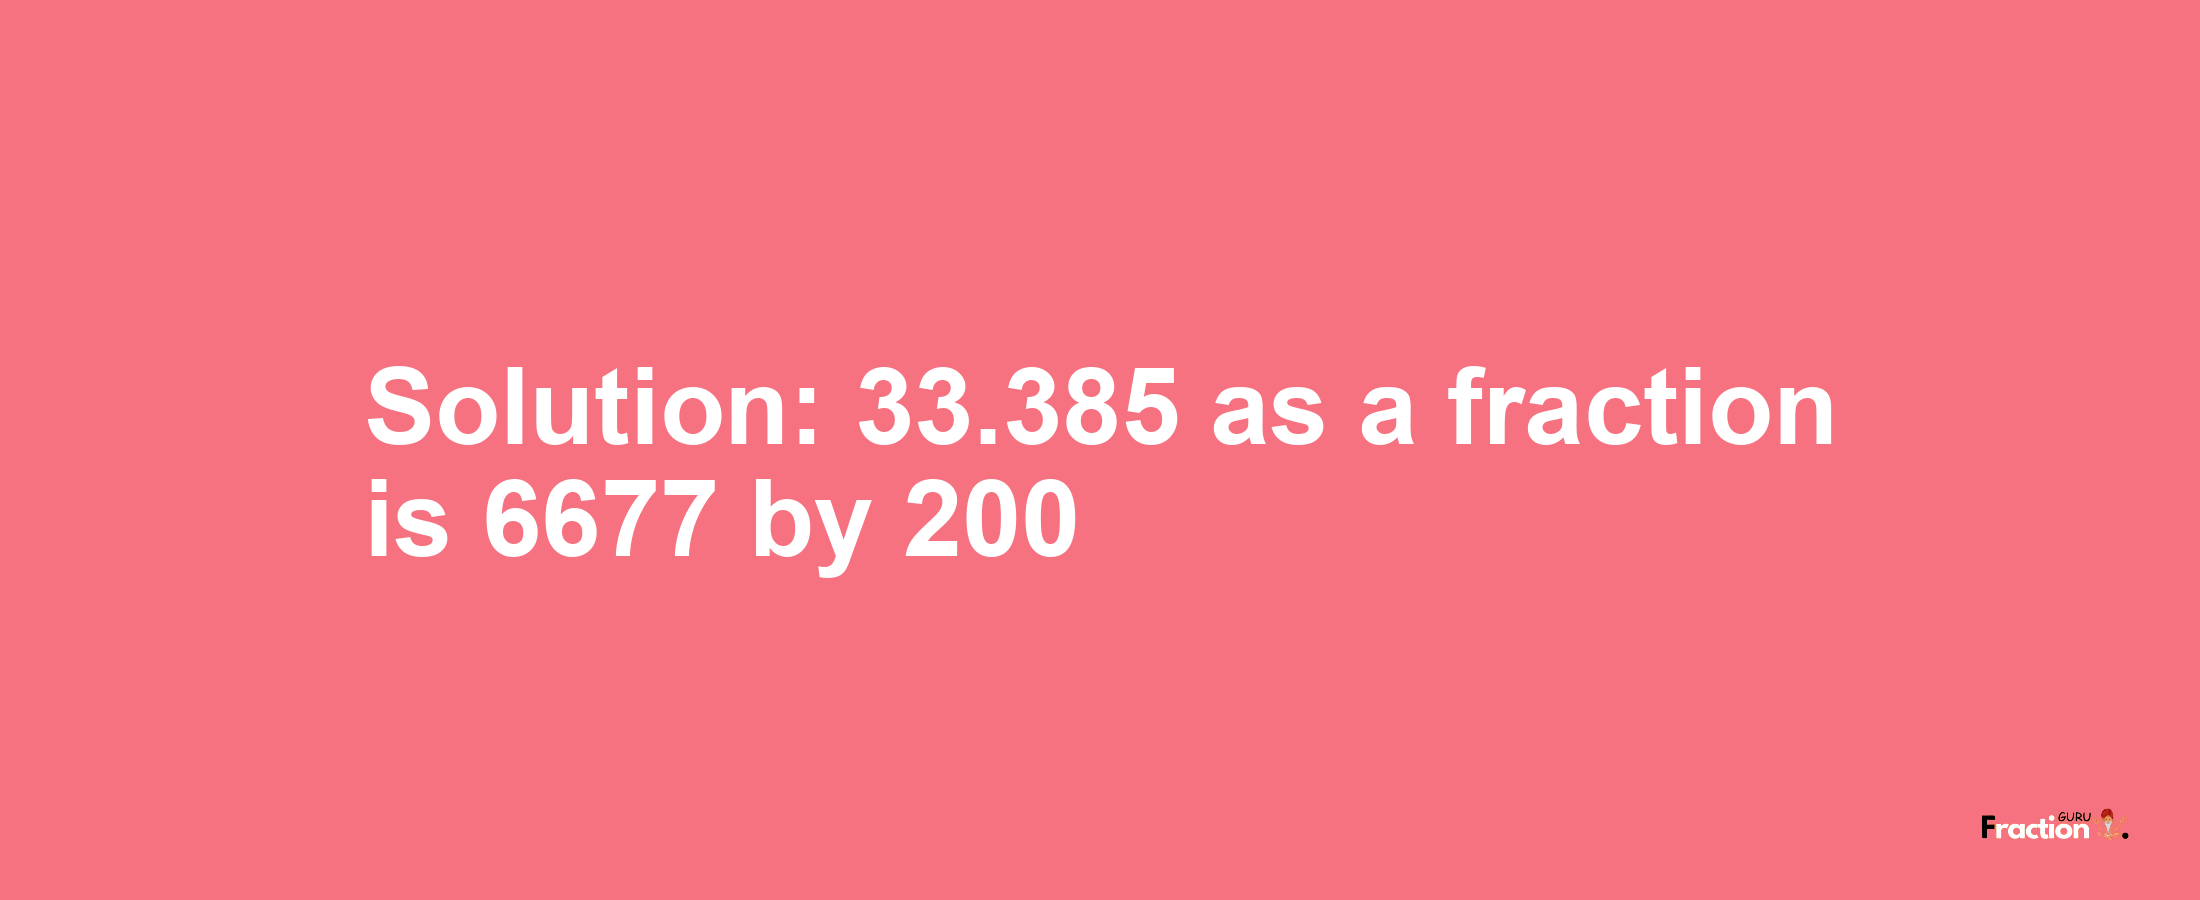 Solution:33.385 as a fraction is 6677/200